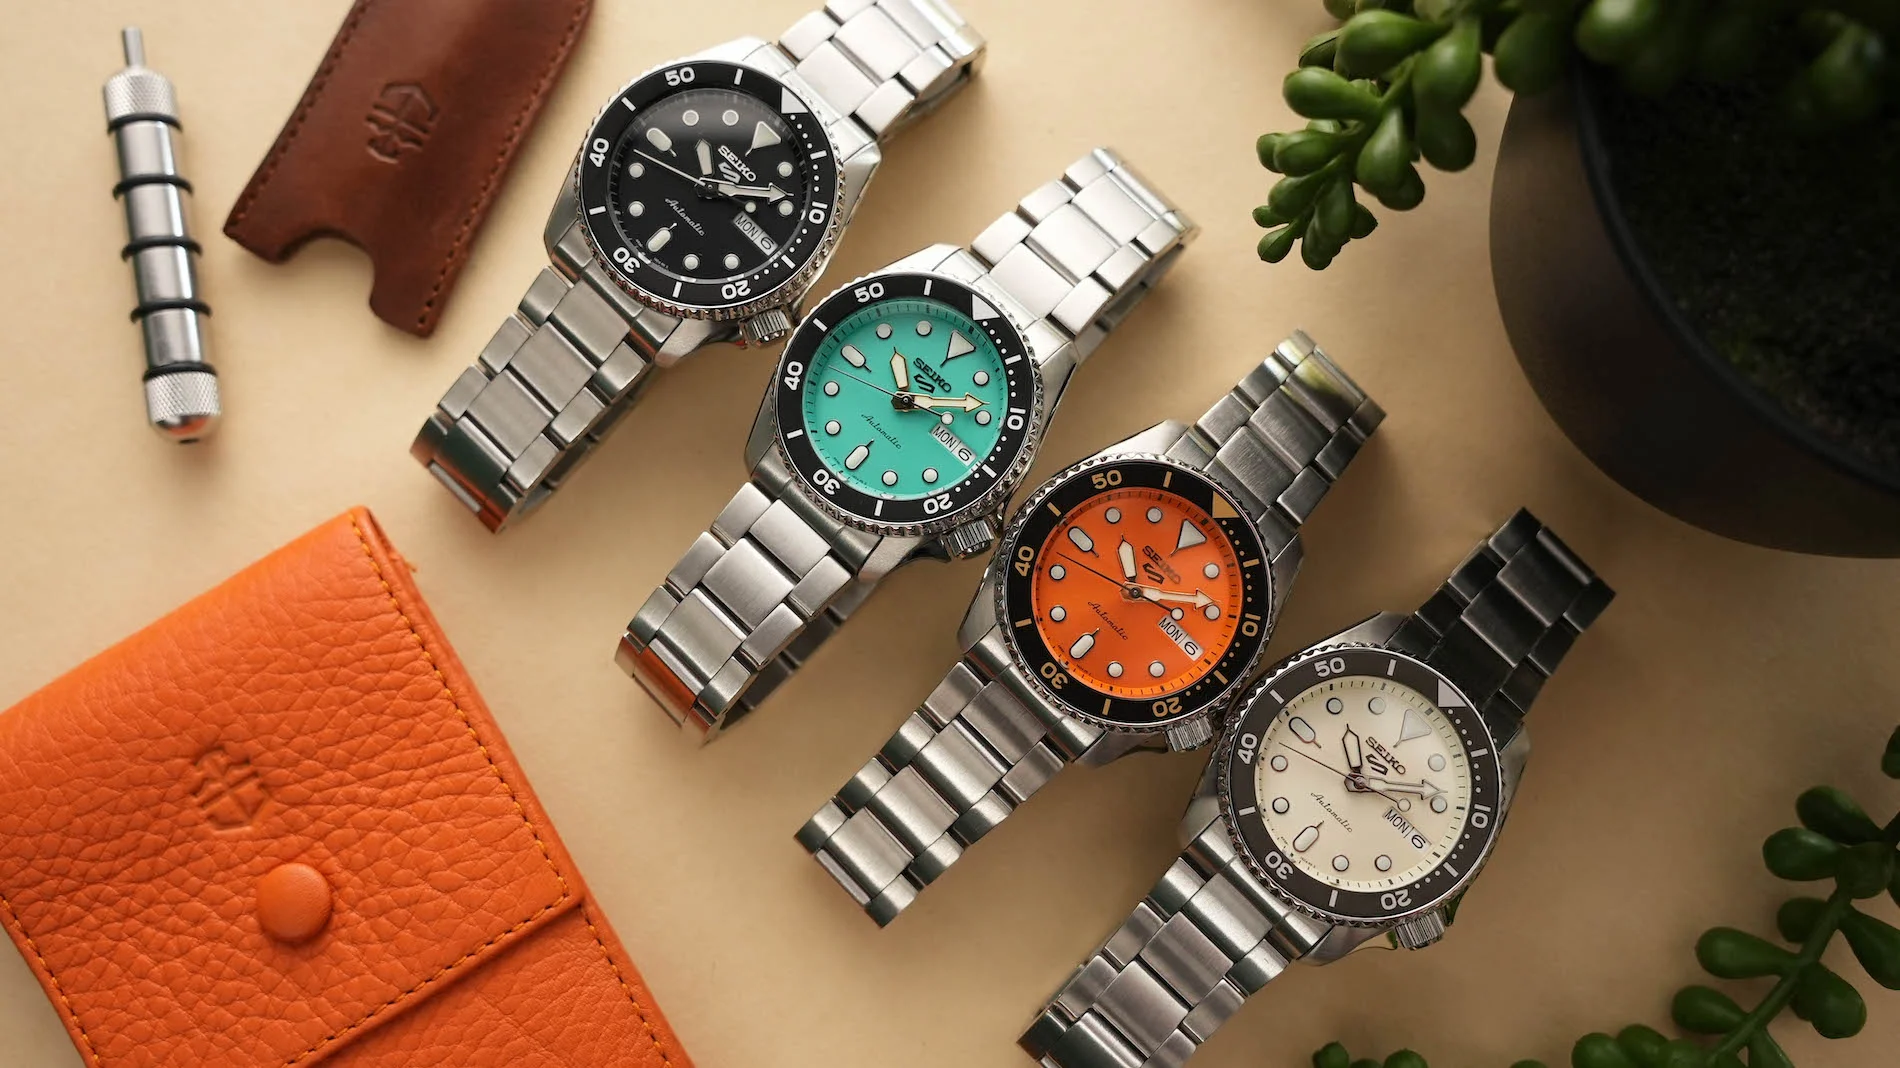 Seiko the SKX-style 5 Sports lineup by shrinking the case - Time